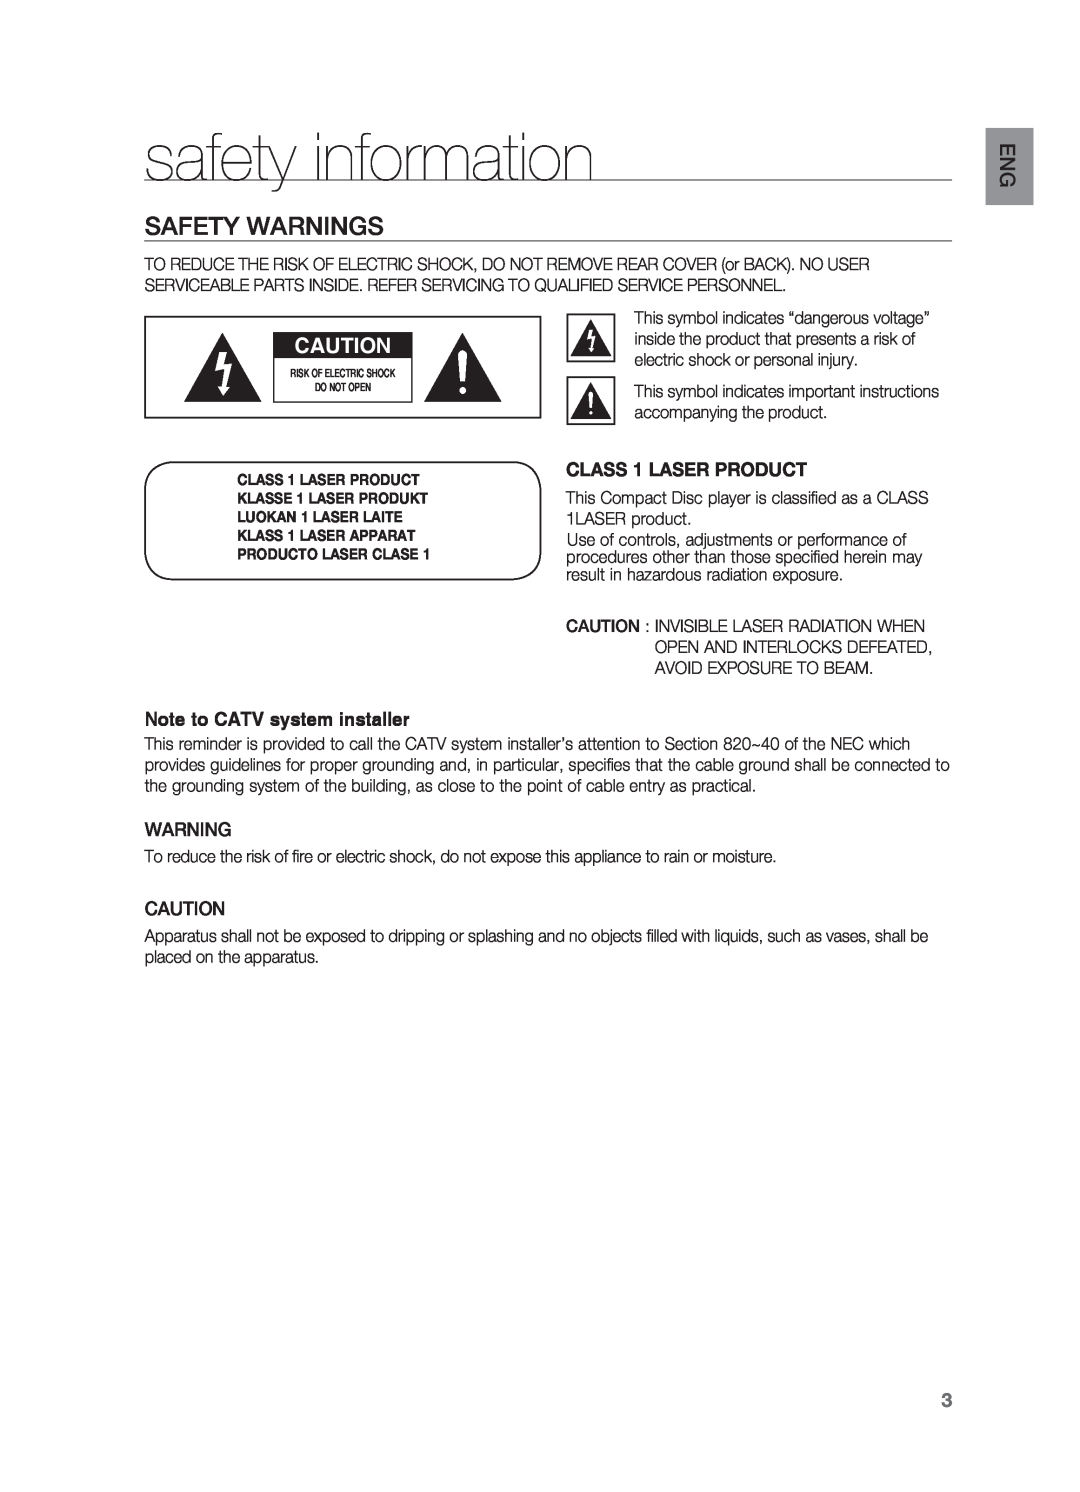 Samsung AH68-02055S manual safety information, Safety Warnings, Note to CATV system installer, CLASS 1 LASER PRODUCT 